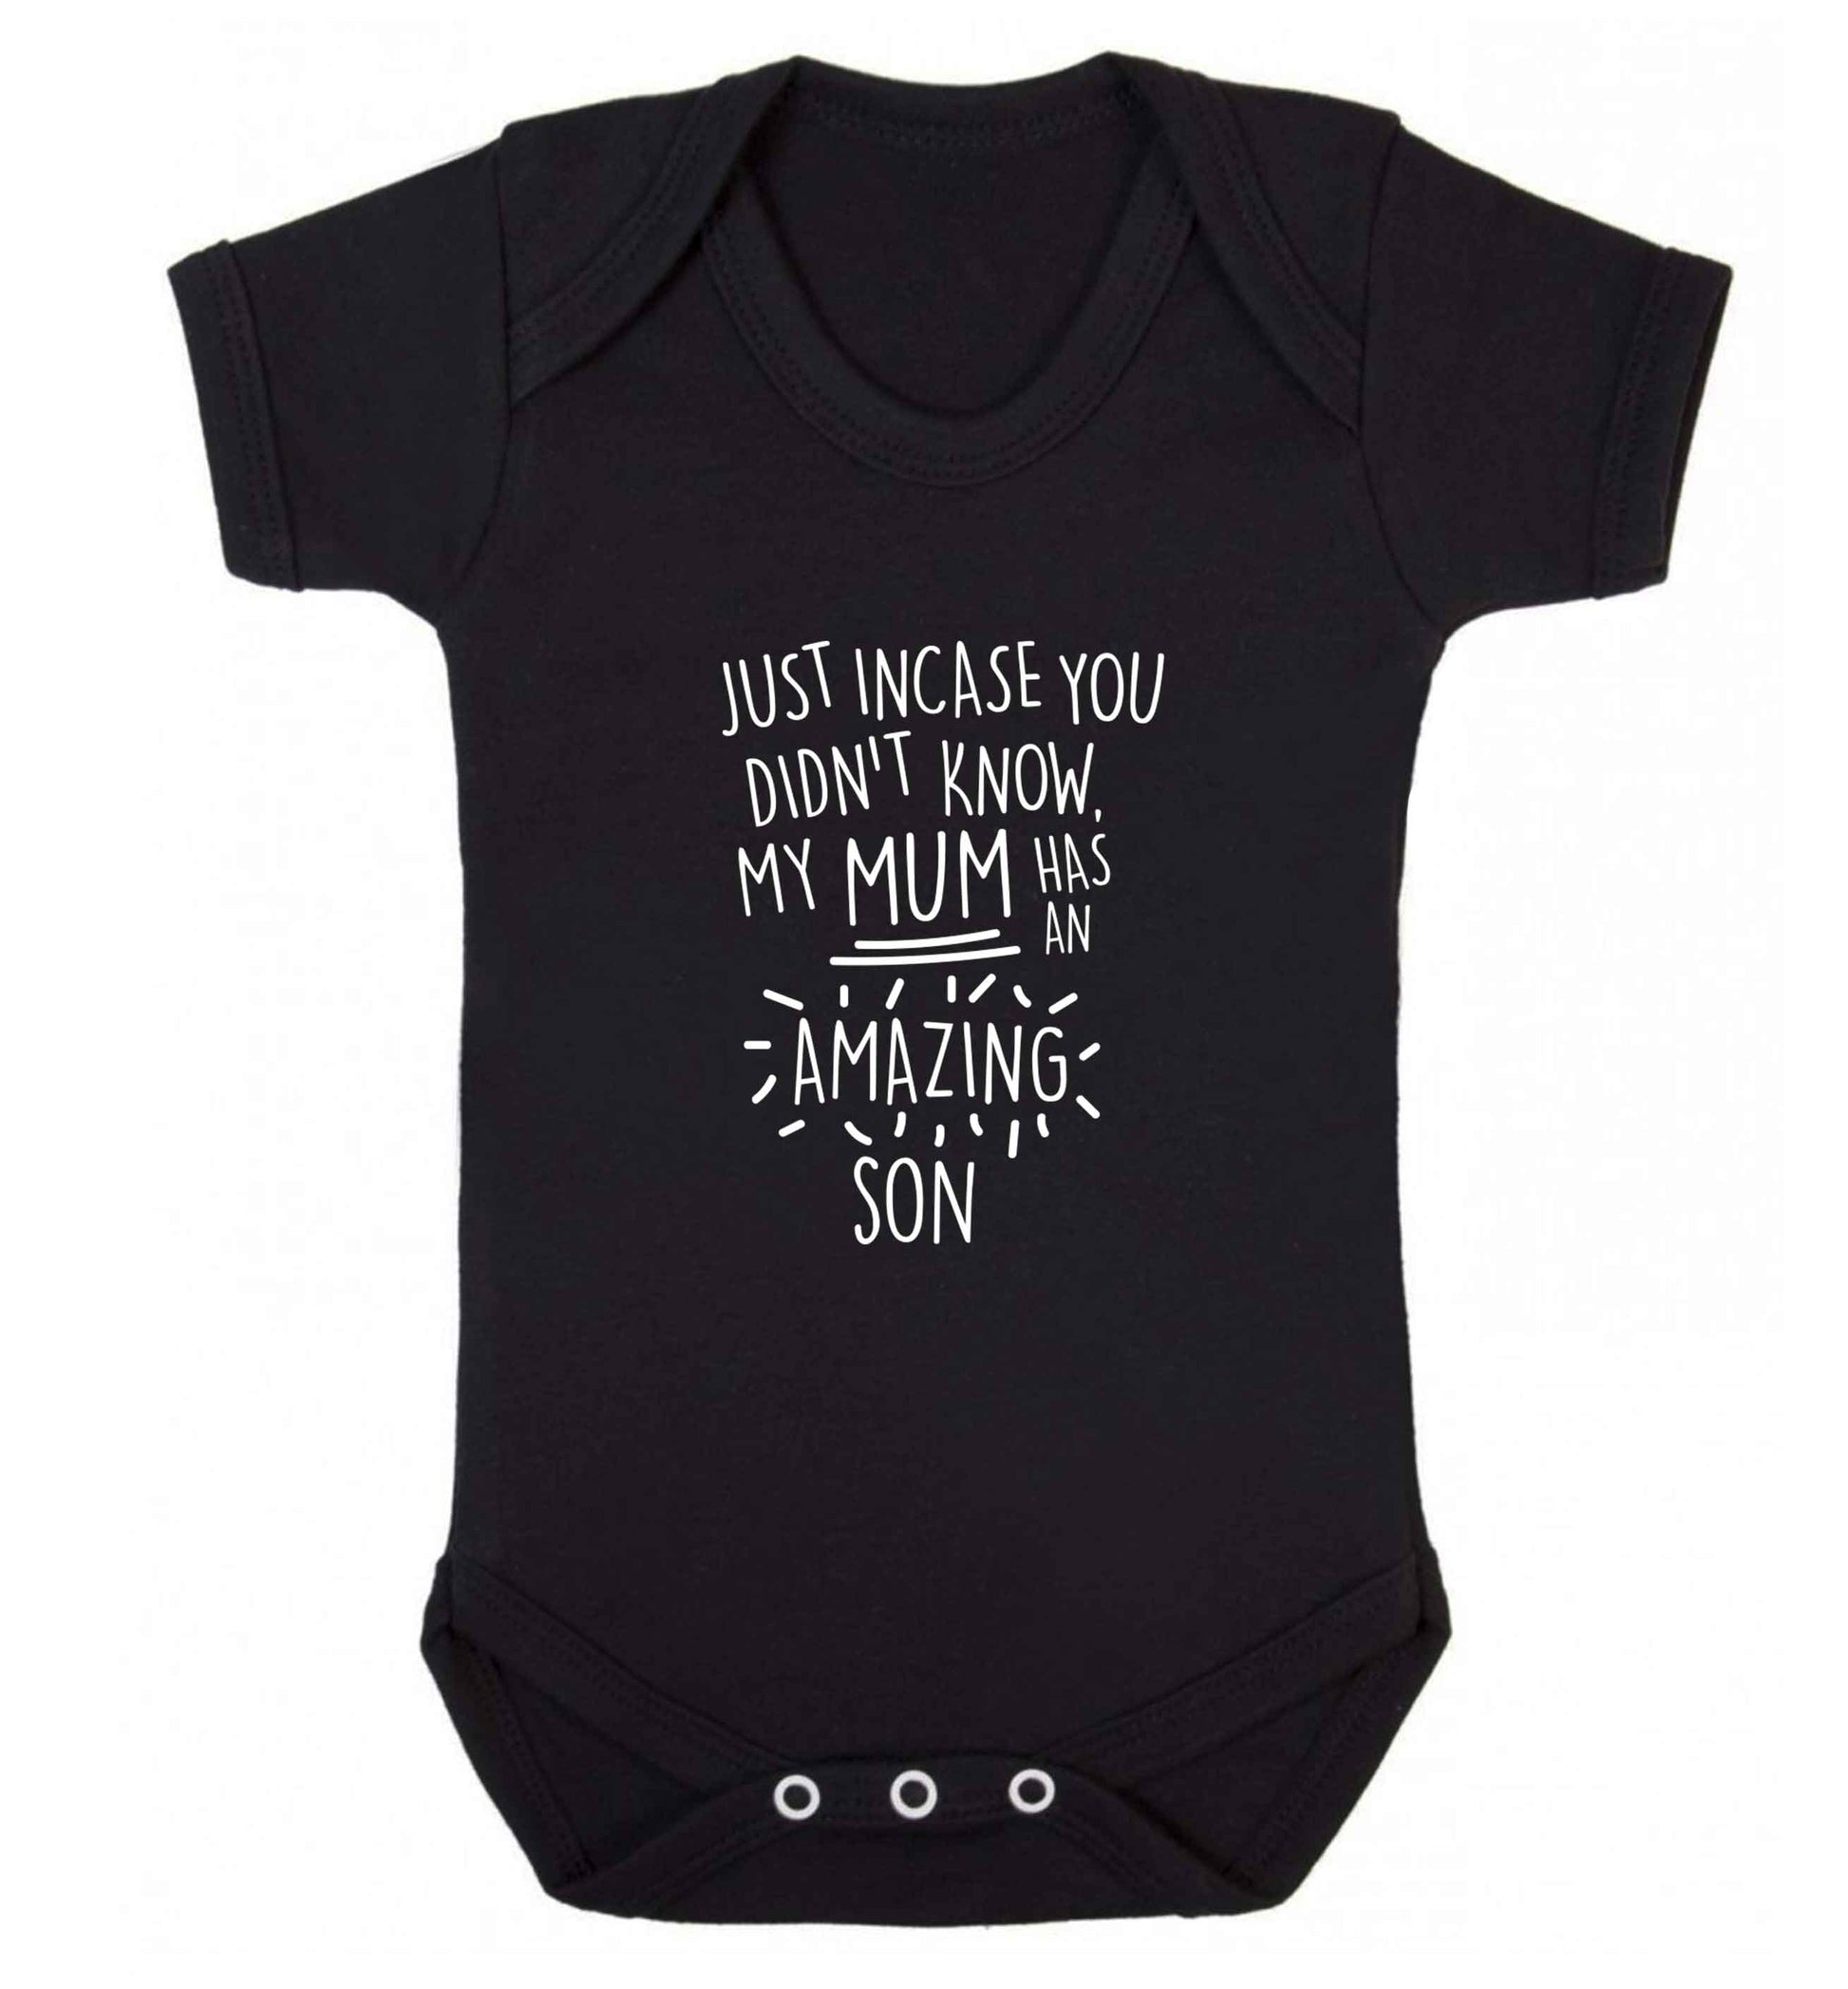 Just incase you didn't know my mum has an amazing son baby vest black 18-24 months